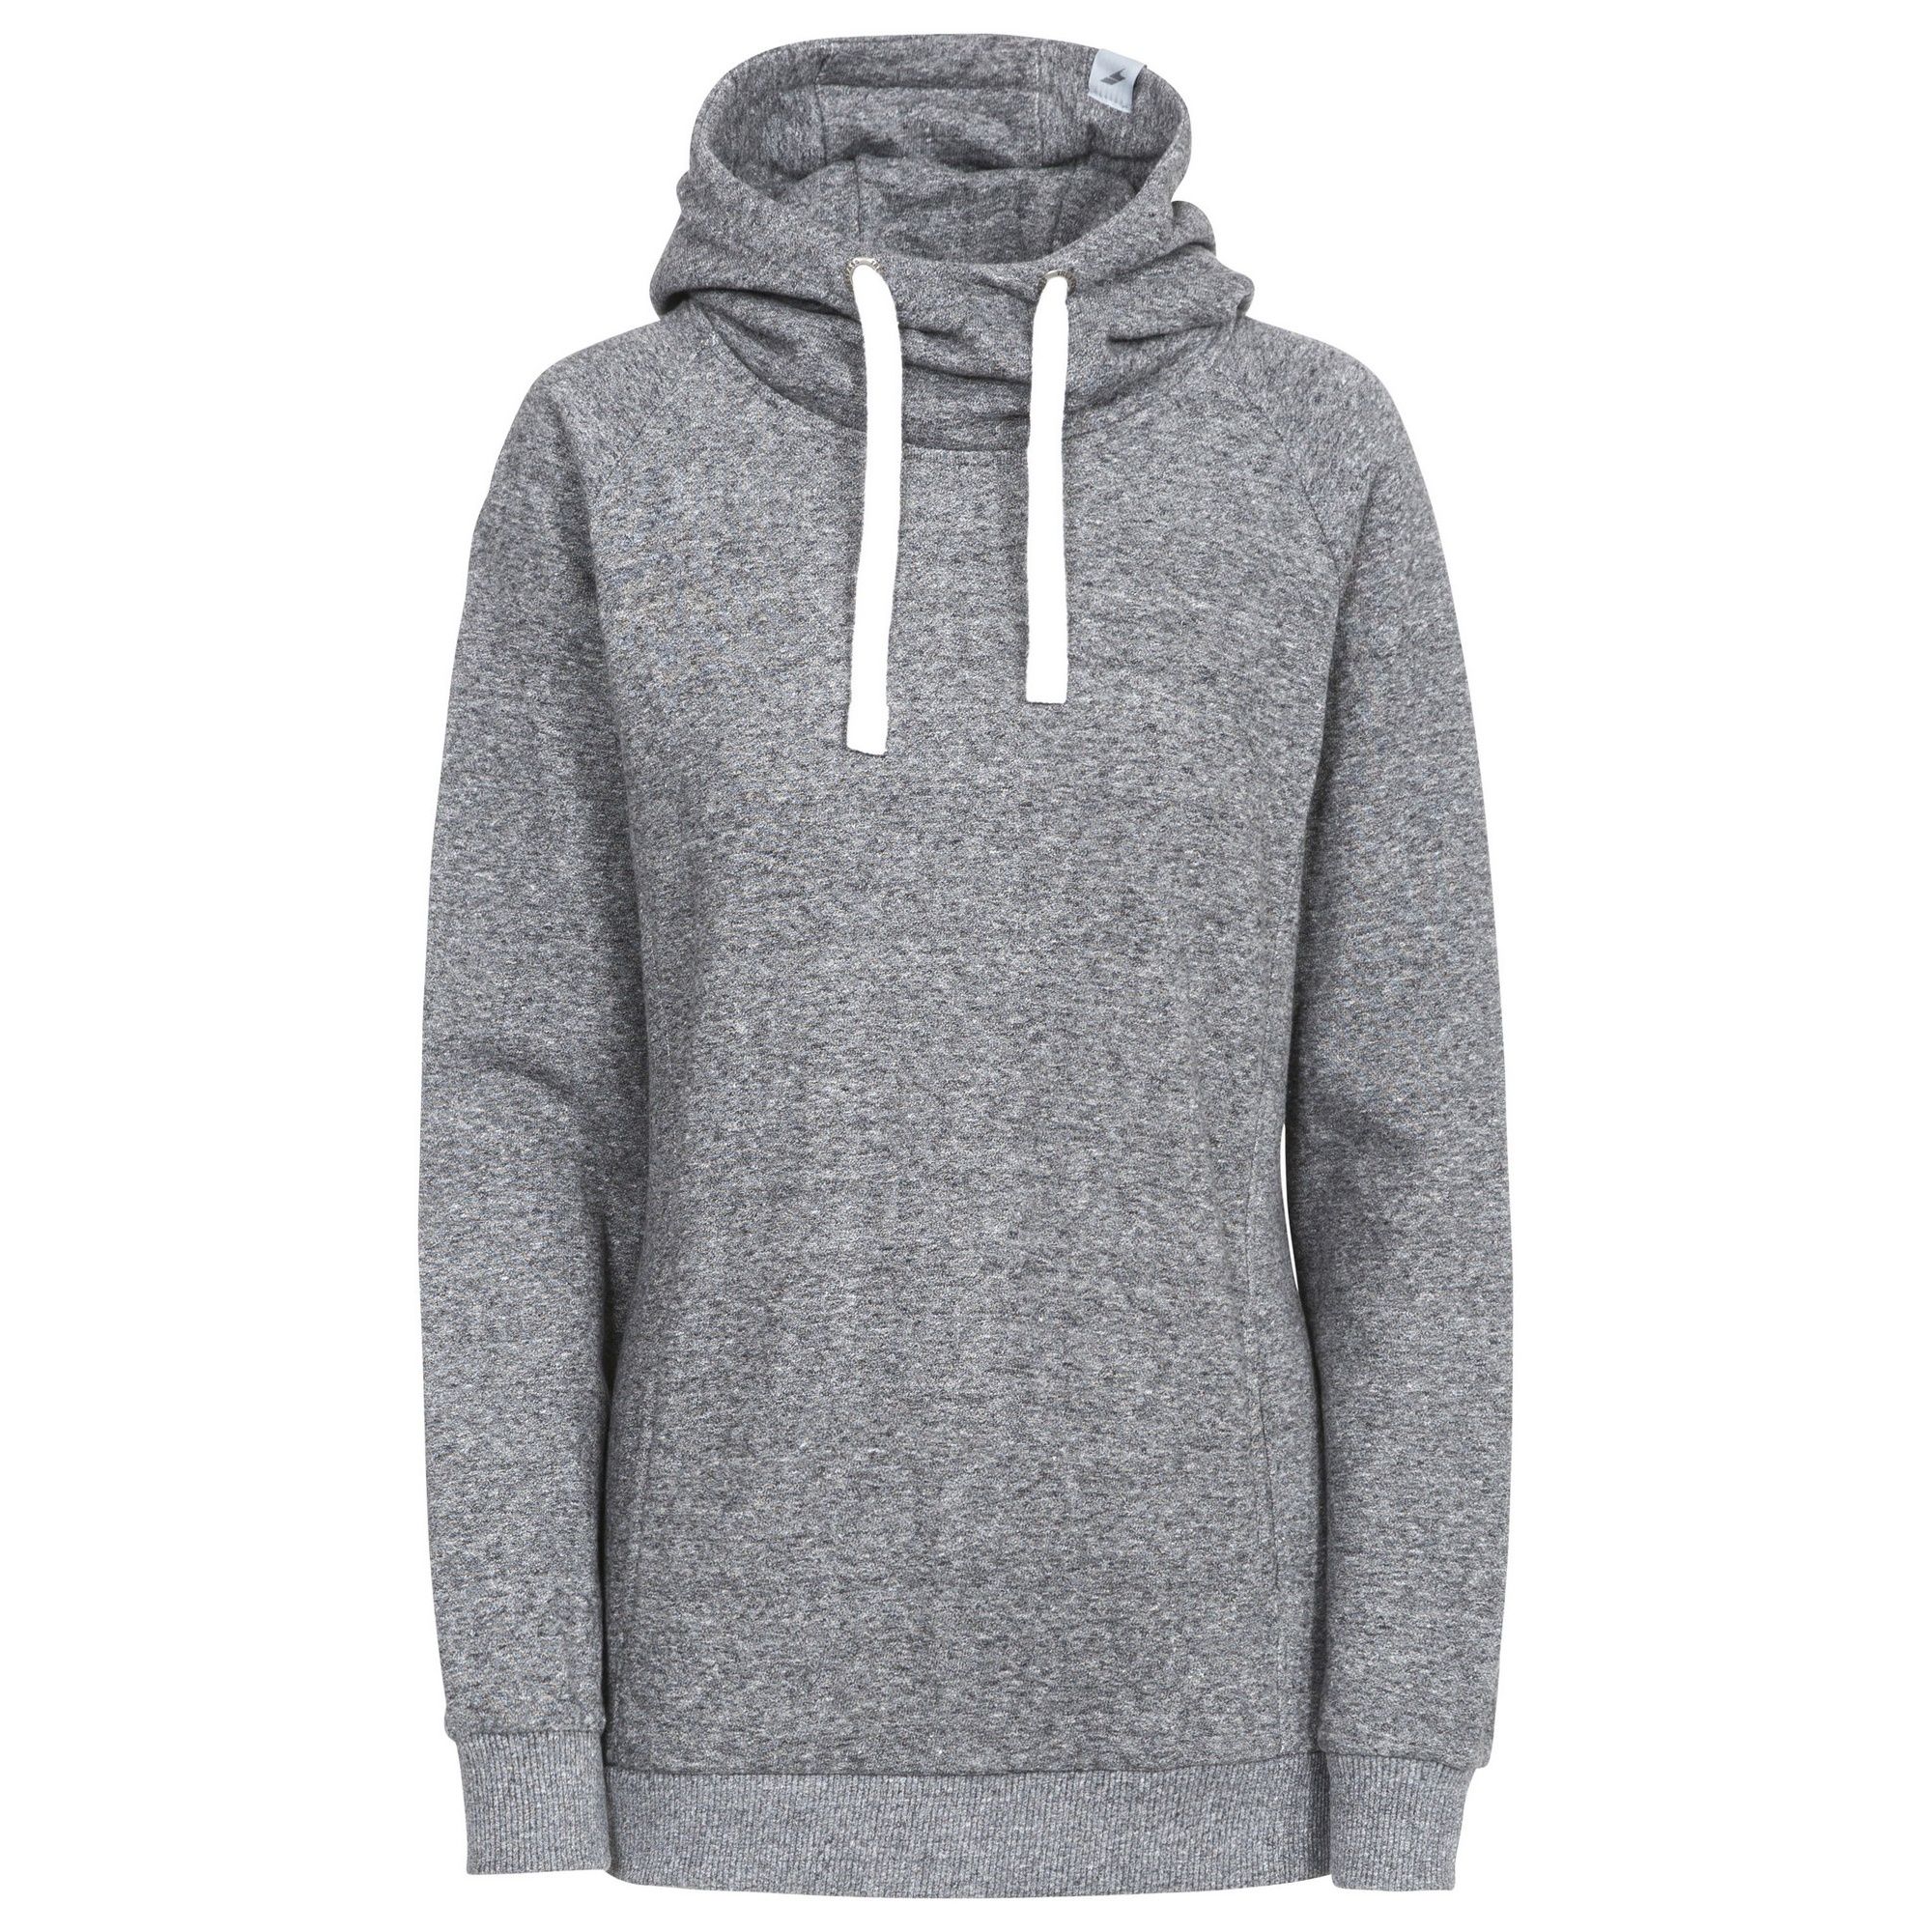 Knitted marl fleece. Looped back. Hooded style. 2 pockets. Contrast hood cord ties. 260gsm. 80% Cotton, 20% Polyester. Trespass Womens Chest Sizing (approx): XS/8 - 32in/81cm, S/10 - 34in/86cm, M/12 - 36in/91.4cm, L/14 - 38in/96.5cm, XL/16 - 40in/101.5cm, XXL/18 - 42in/106.5cm.